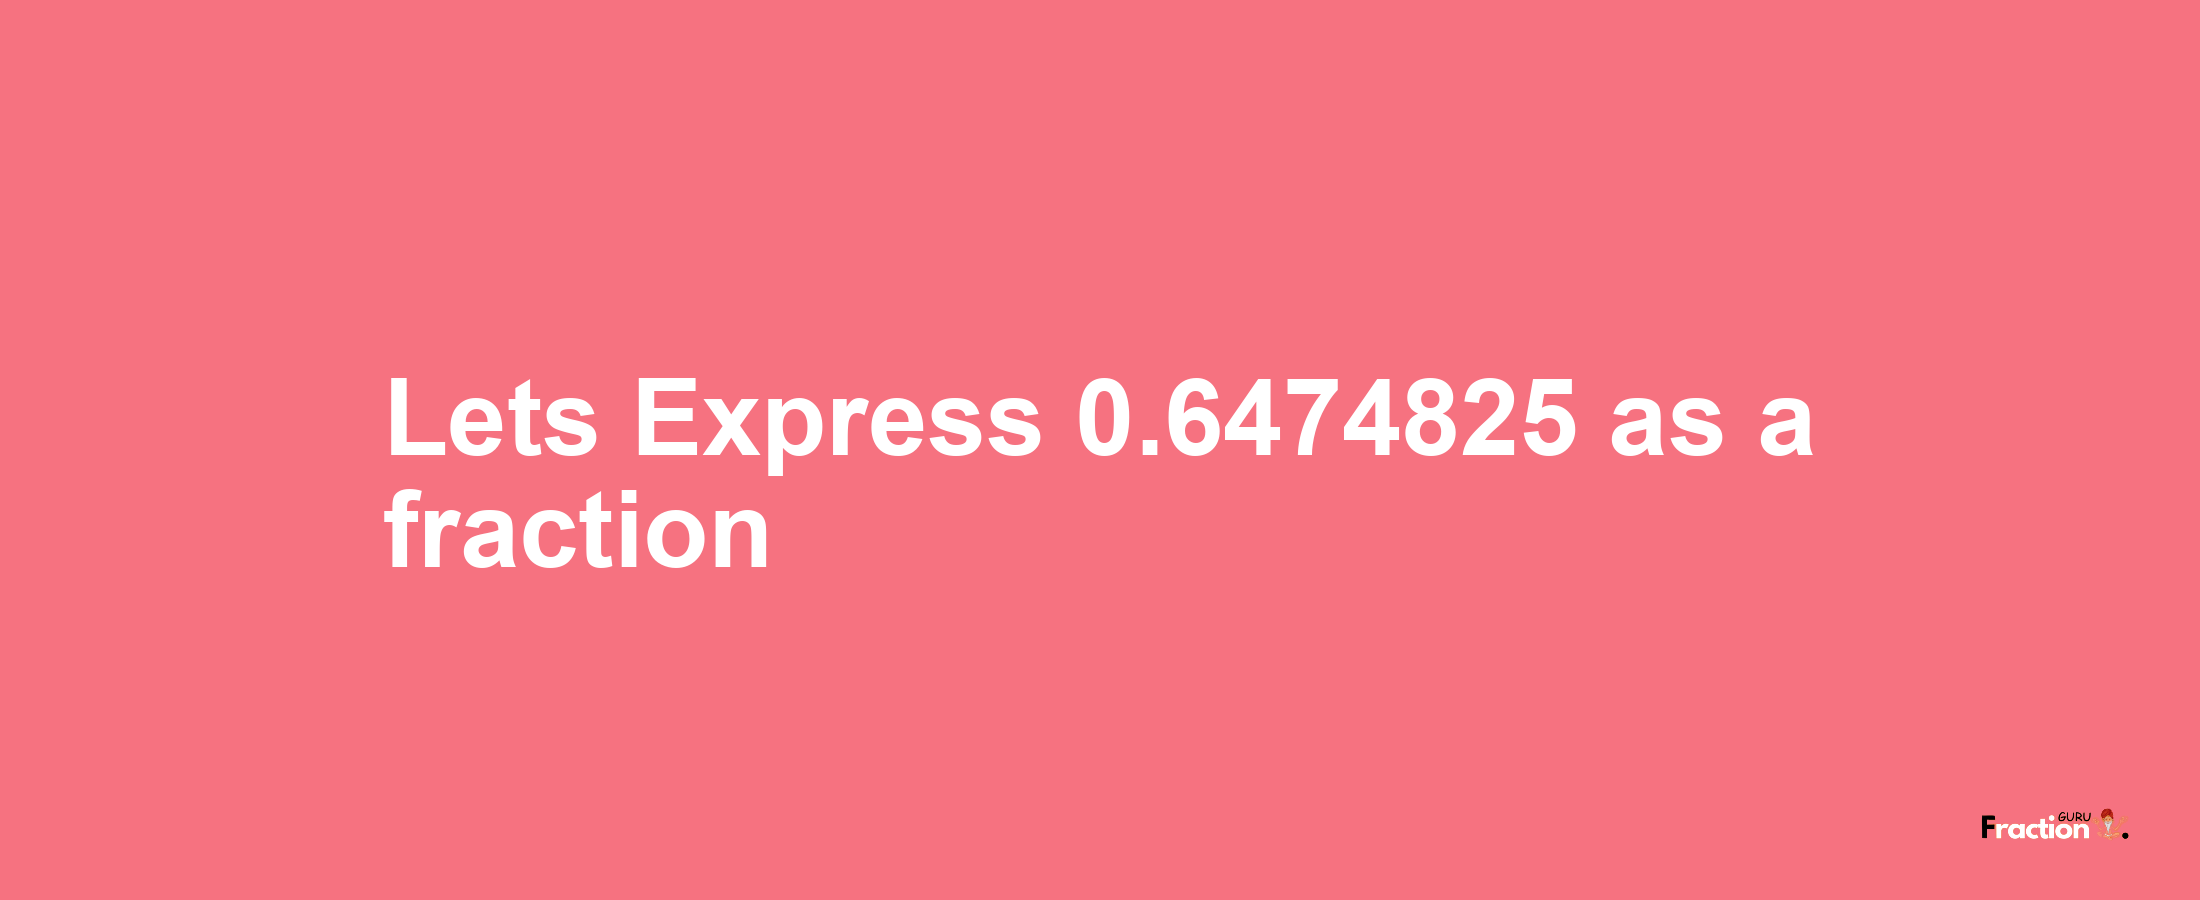 Lets Express 0.6474825 as afraction